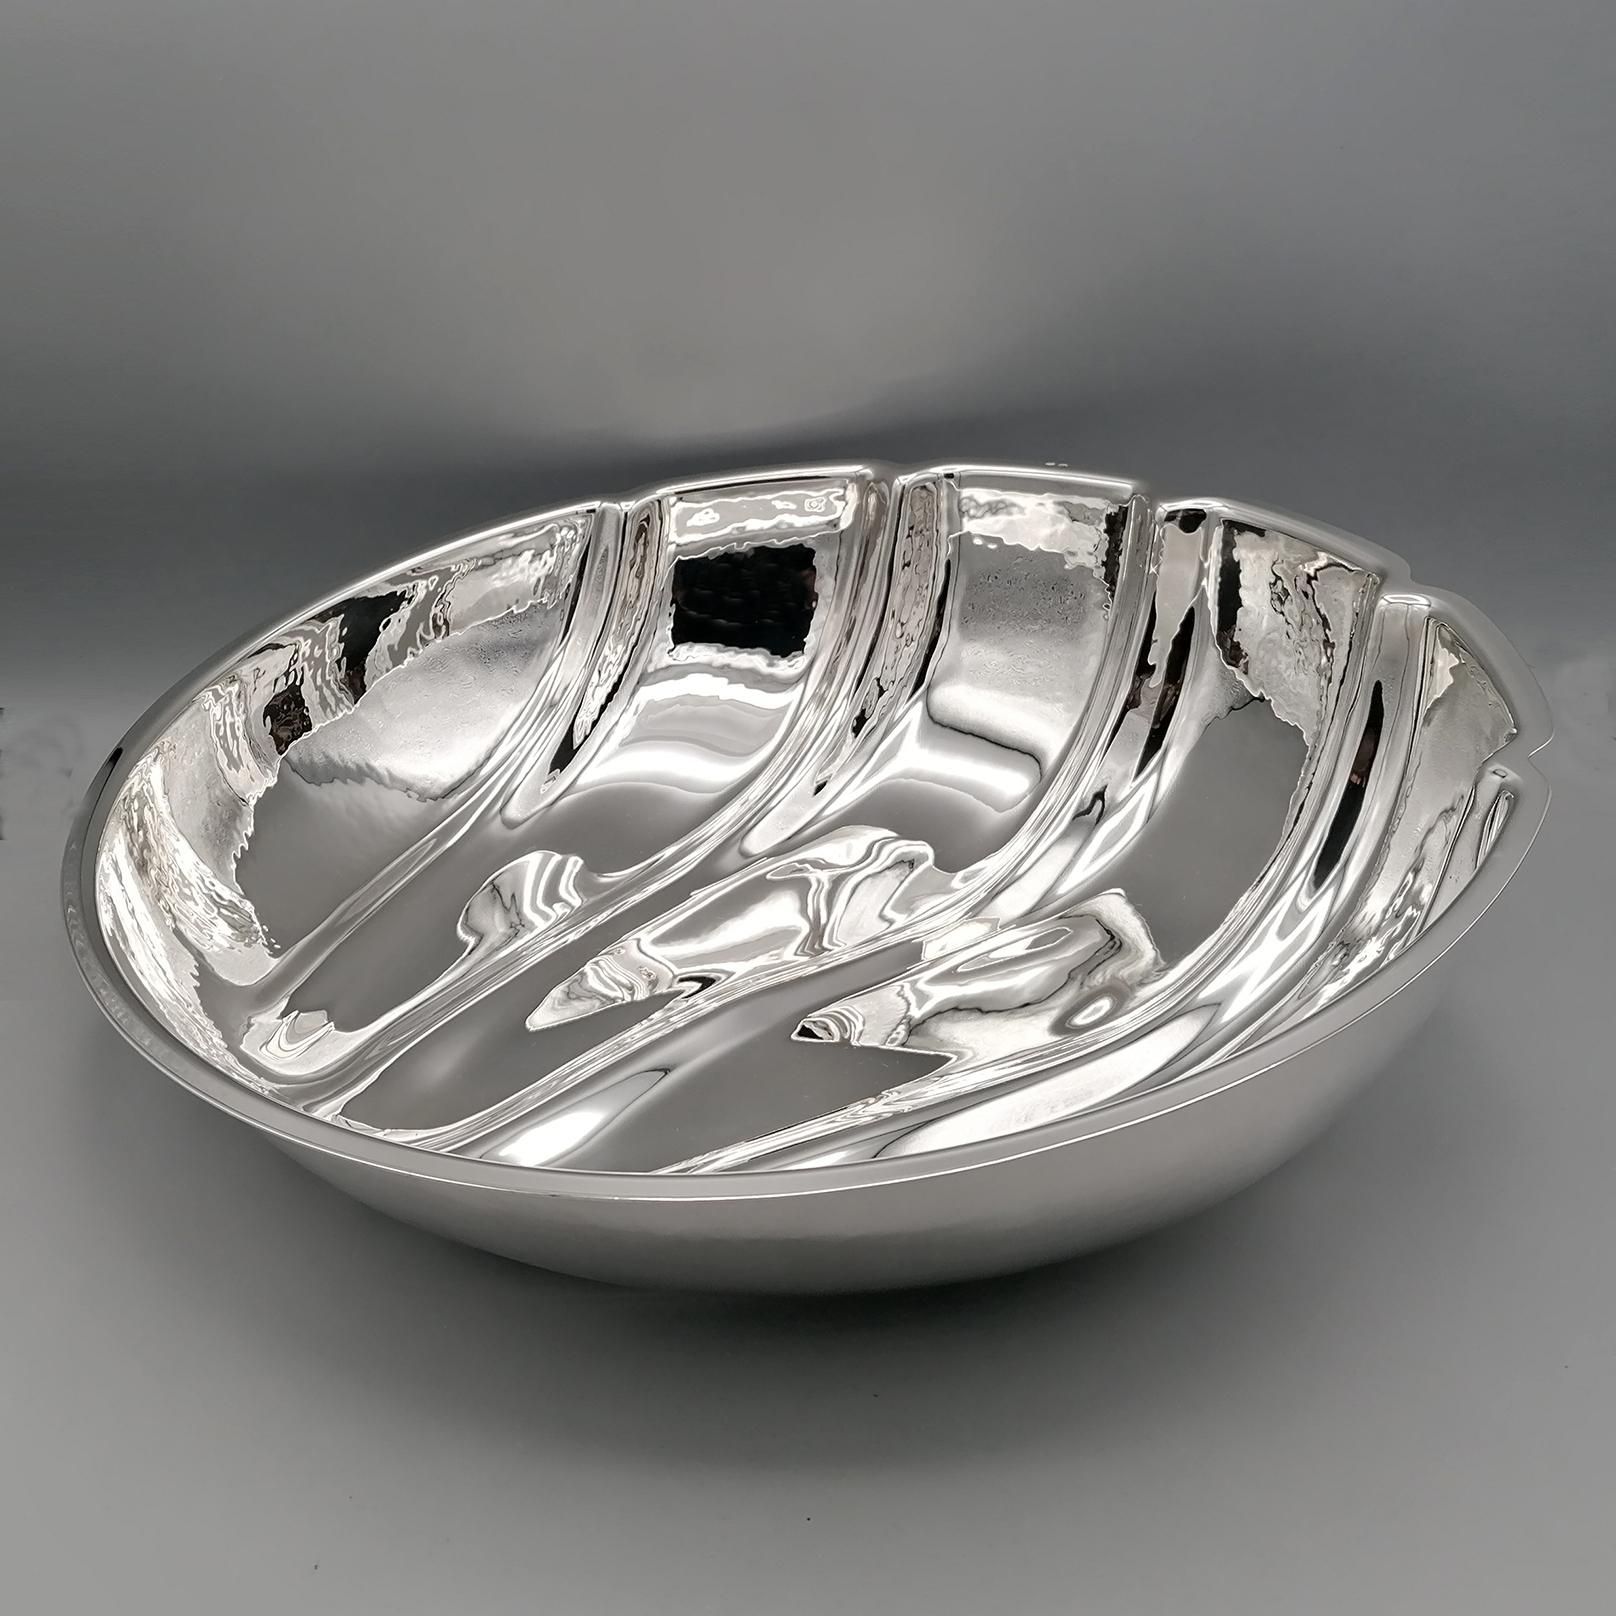 Large centerpiece in 800 solid silver, machine made and hand finished.
The shape of the centerpiece is shaped to form a shell, it is round in shape and with variable height to degrade.
The folds are typical of shells and make the whole centerpiece